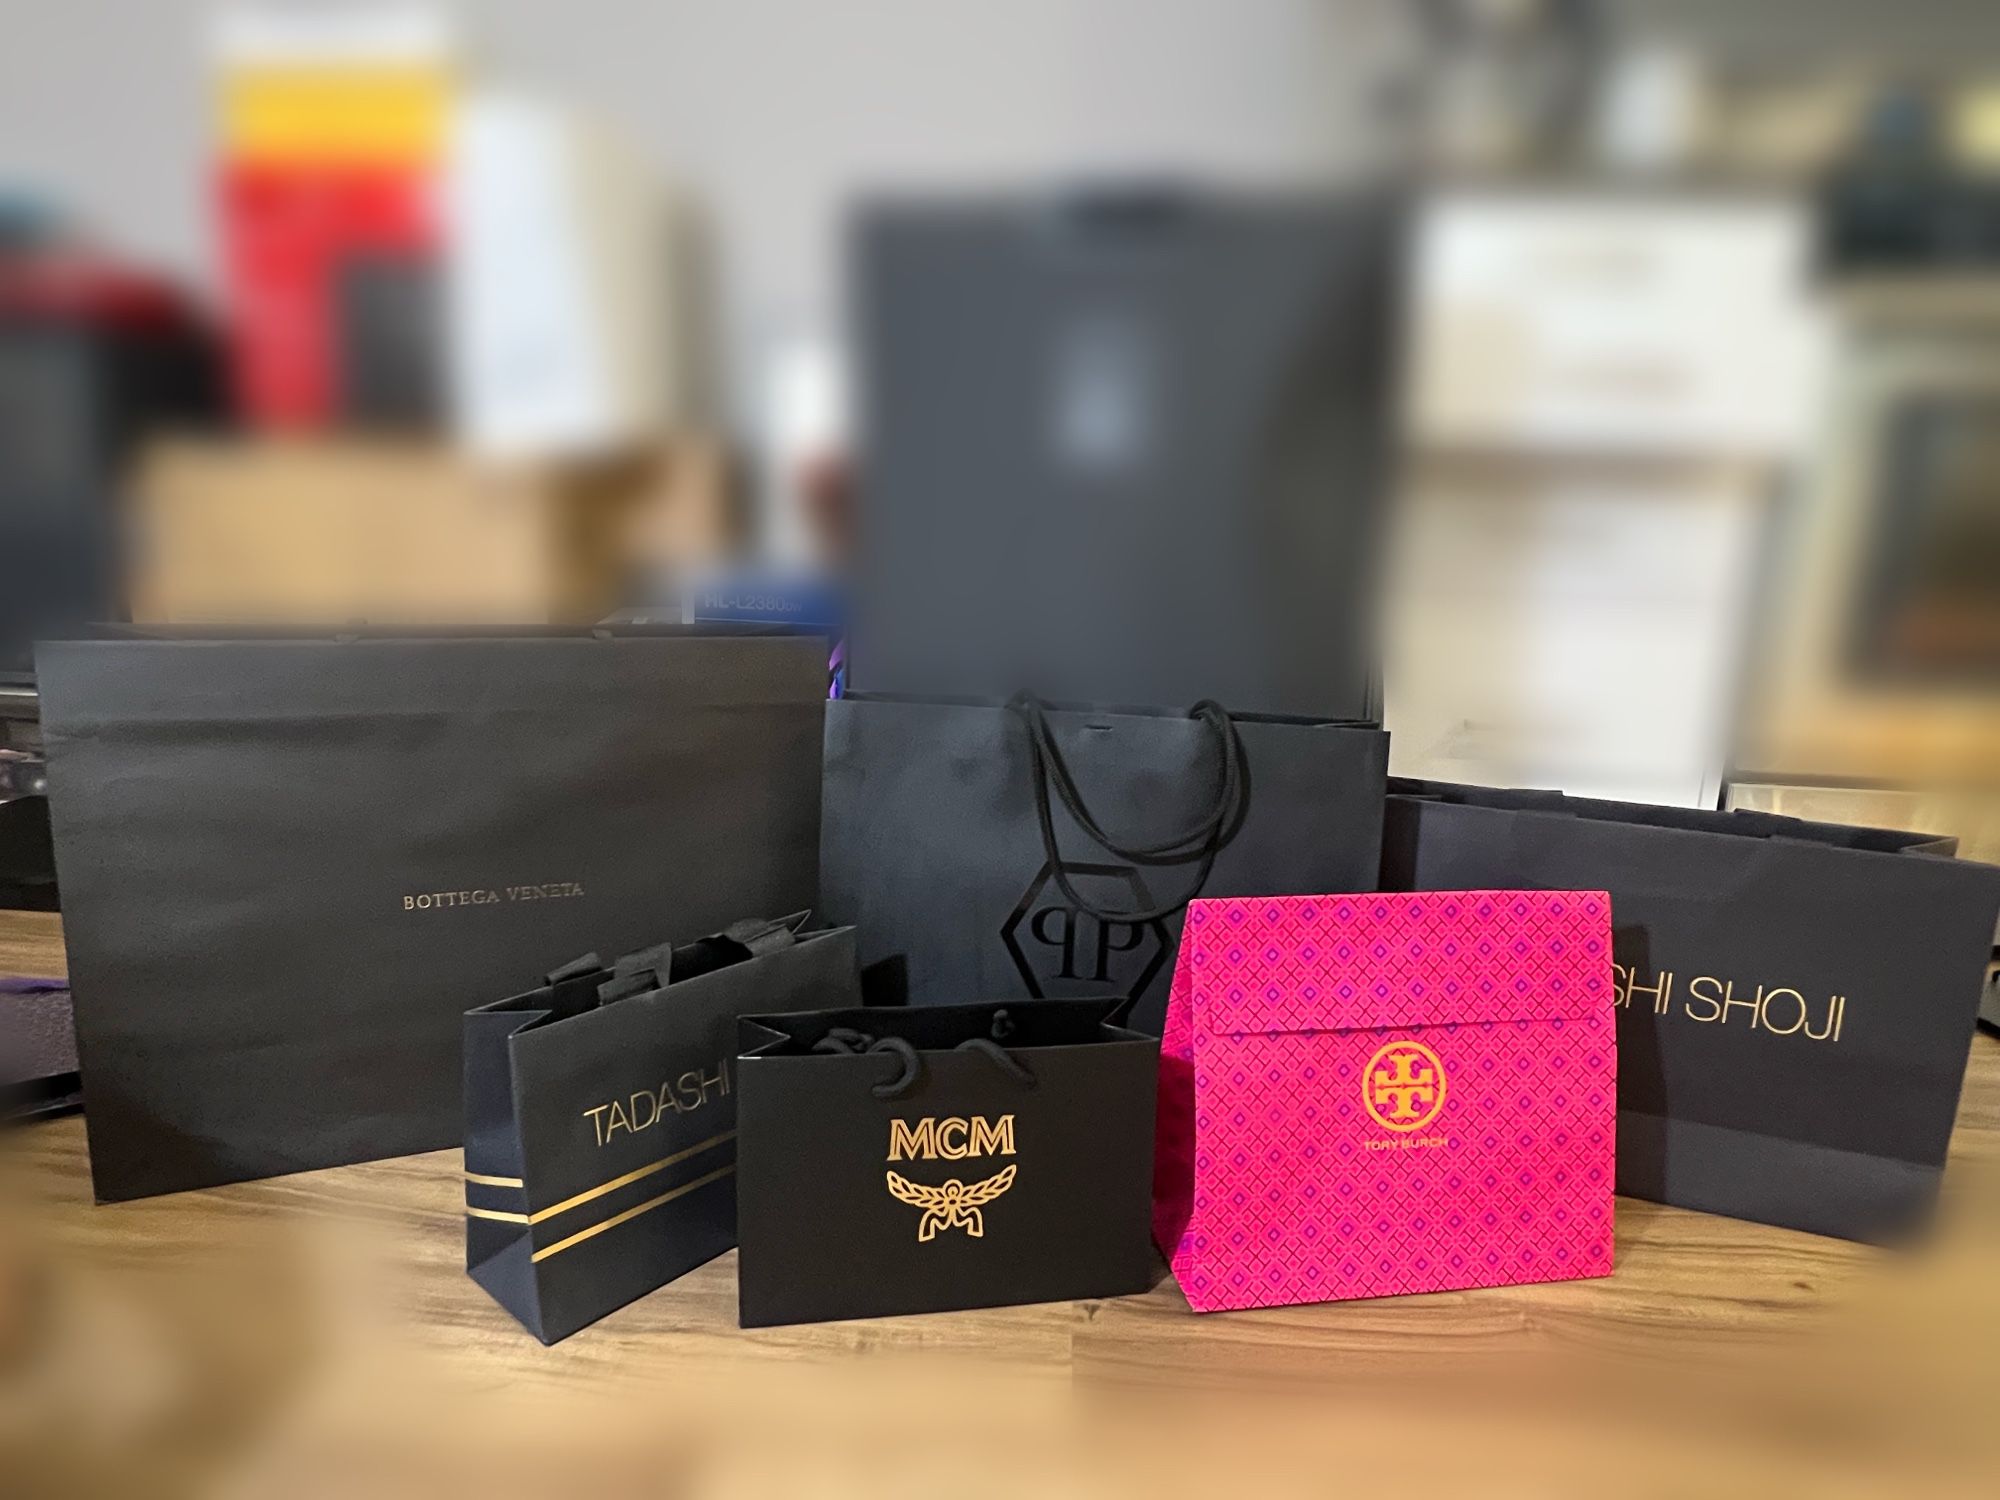 Authentic Louis Vuitton Paper Shopping Gift Bag for Sale in Sunnyvale, CA -  OfferUp